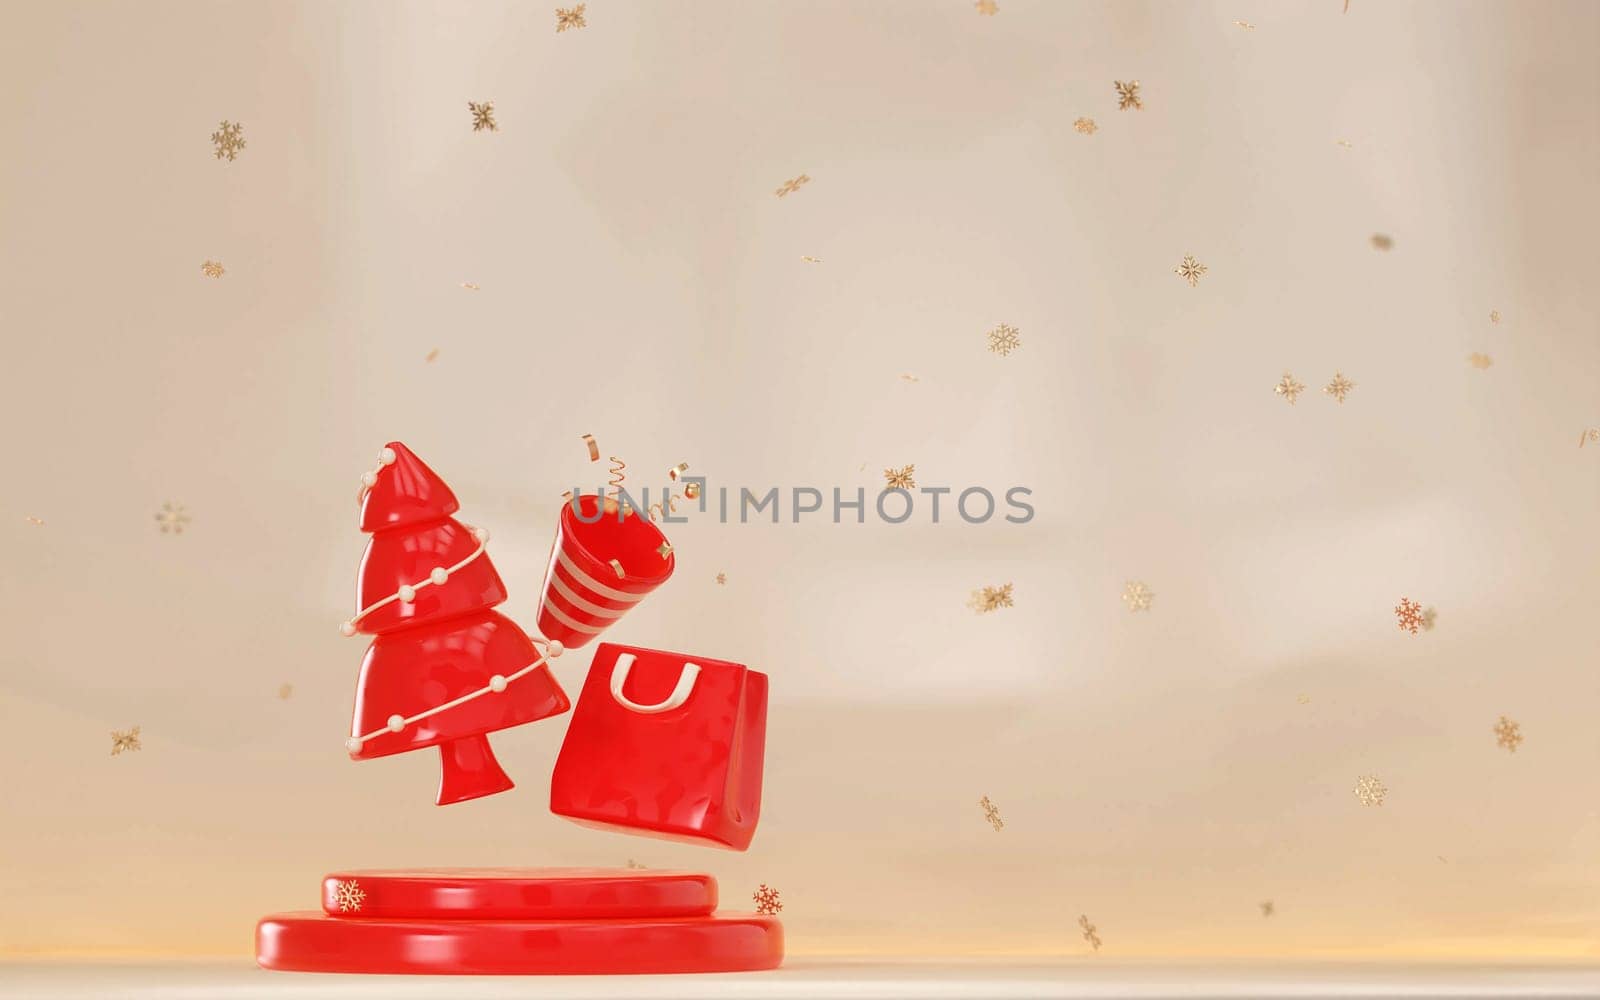 3D rendering, christmas tree,red bag and red party popper on red stand with light yellow background and Snow covered for New Year winter banner. by meepiangraphic